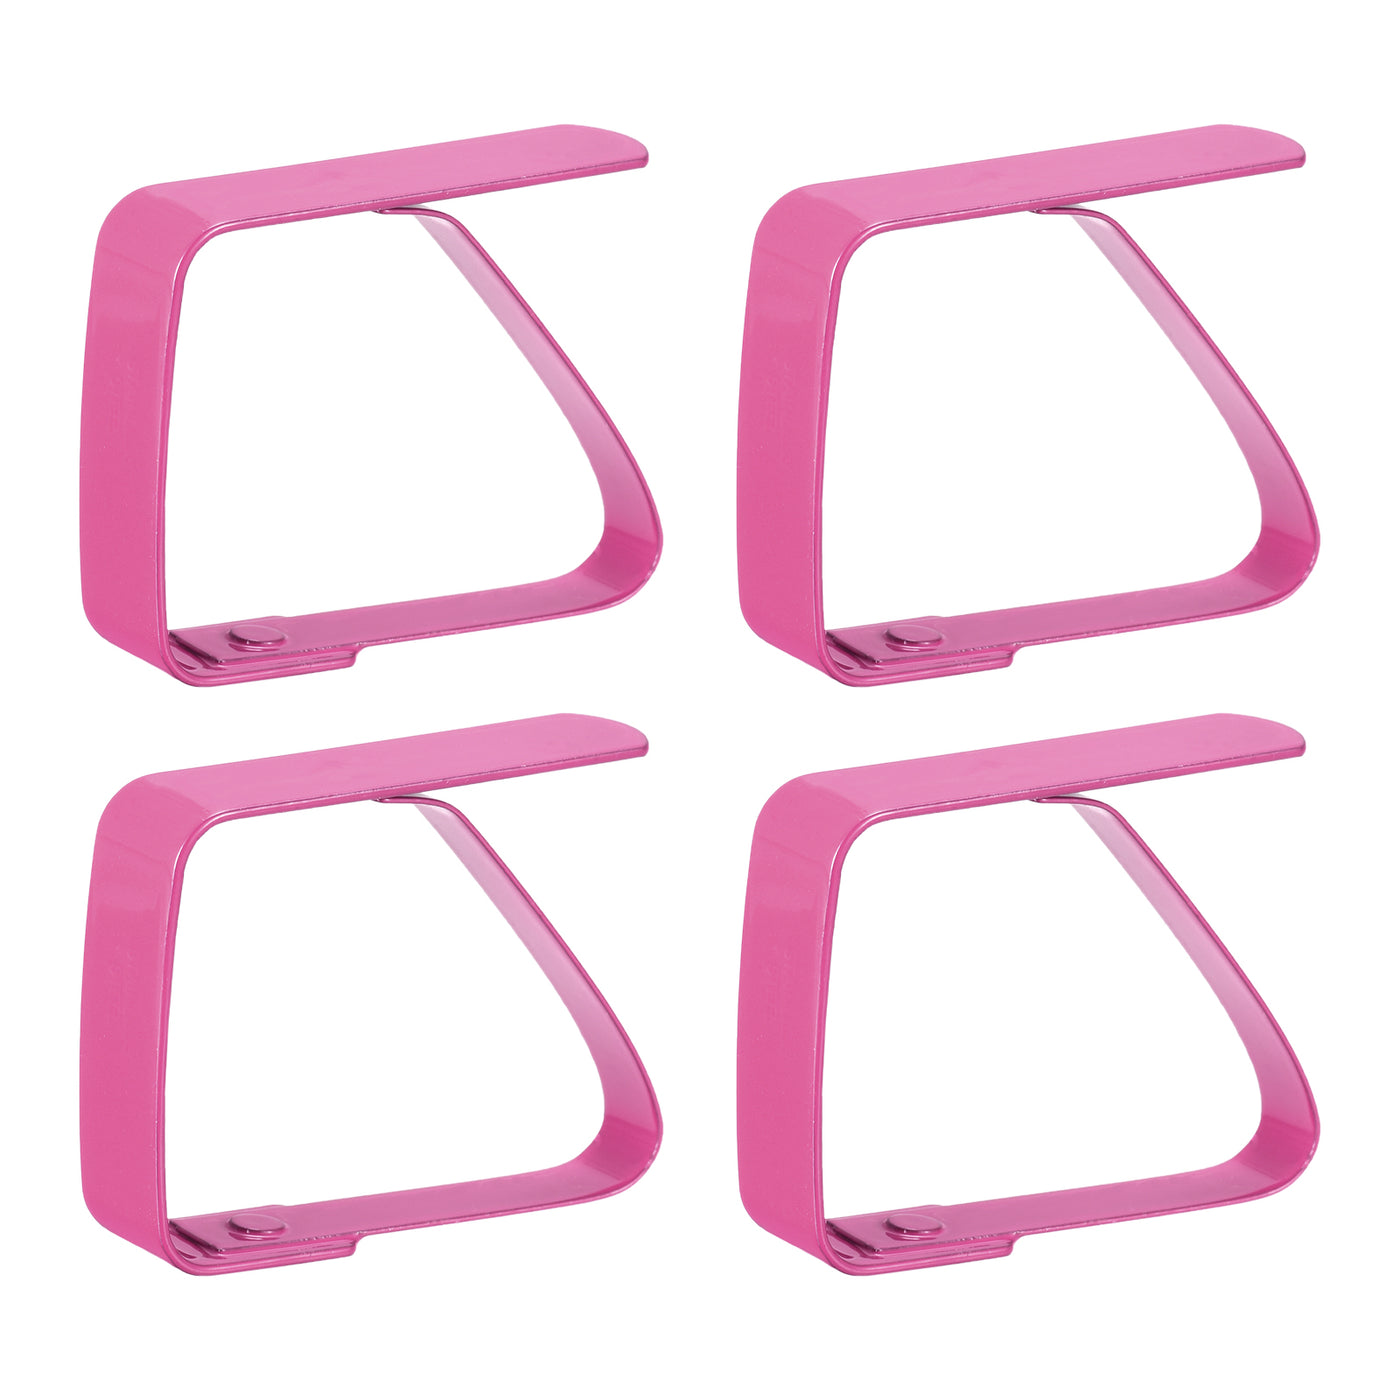 uxcell Uxcell Tablecloth Clips 50mm x 40mm 420 Stainless Steel Table Cloth Holder Pink 12 Pcs